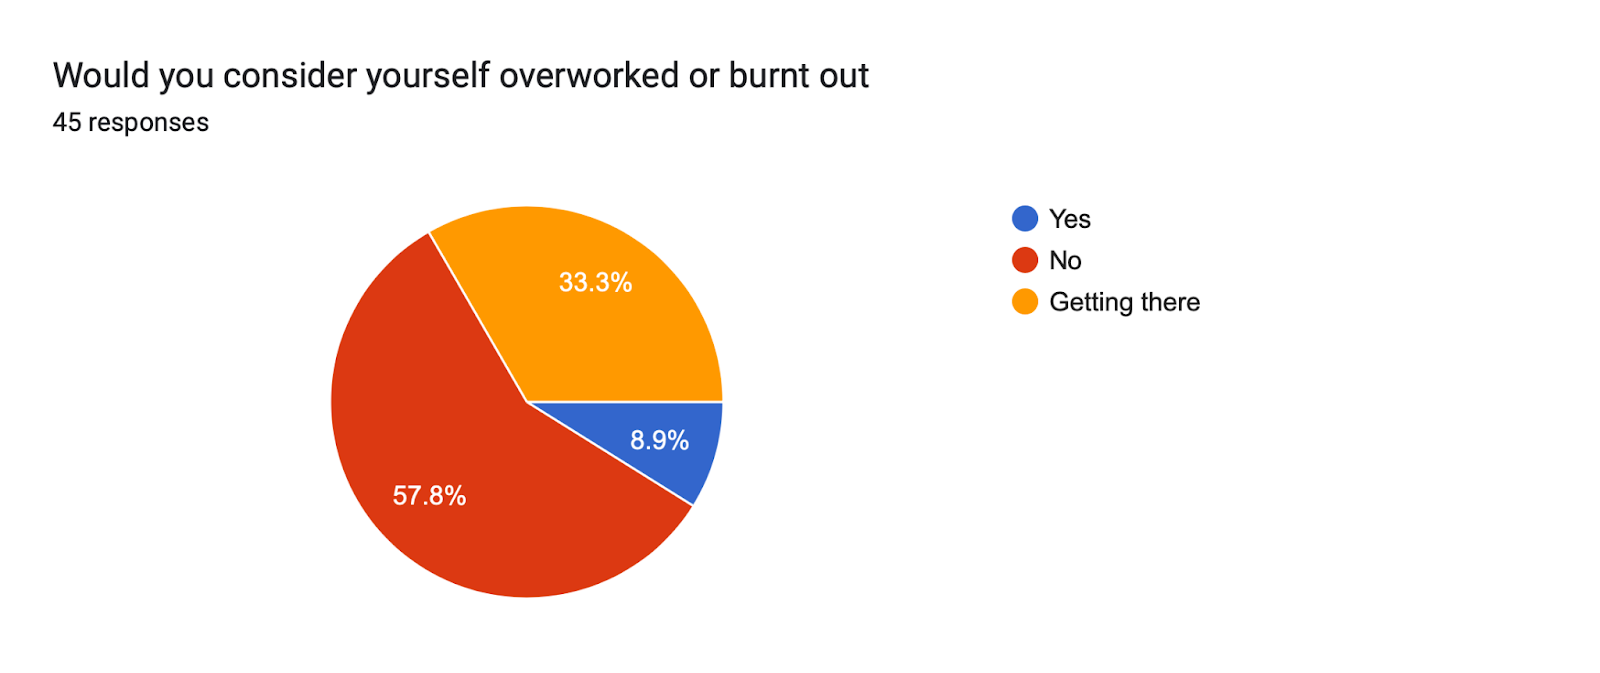 Forms response chart. Question title: Would you consider yourself overworked or burnt out. Number of responses: 45 responses.